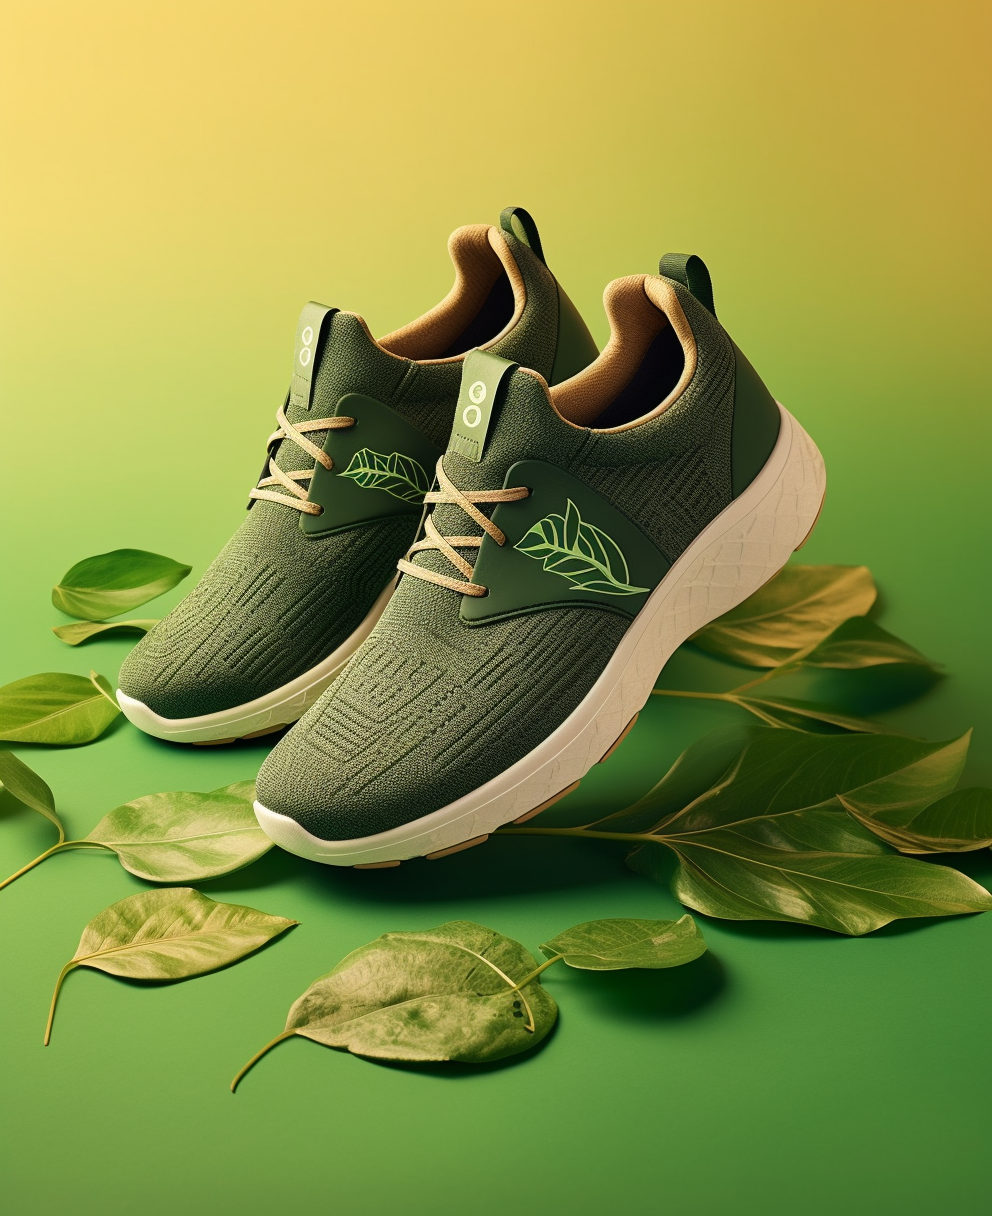 Green Sustainable shoe with leaf design and leaves scattered in the background